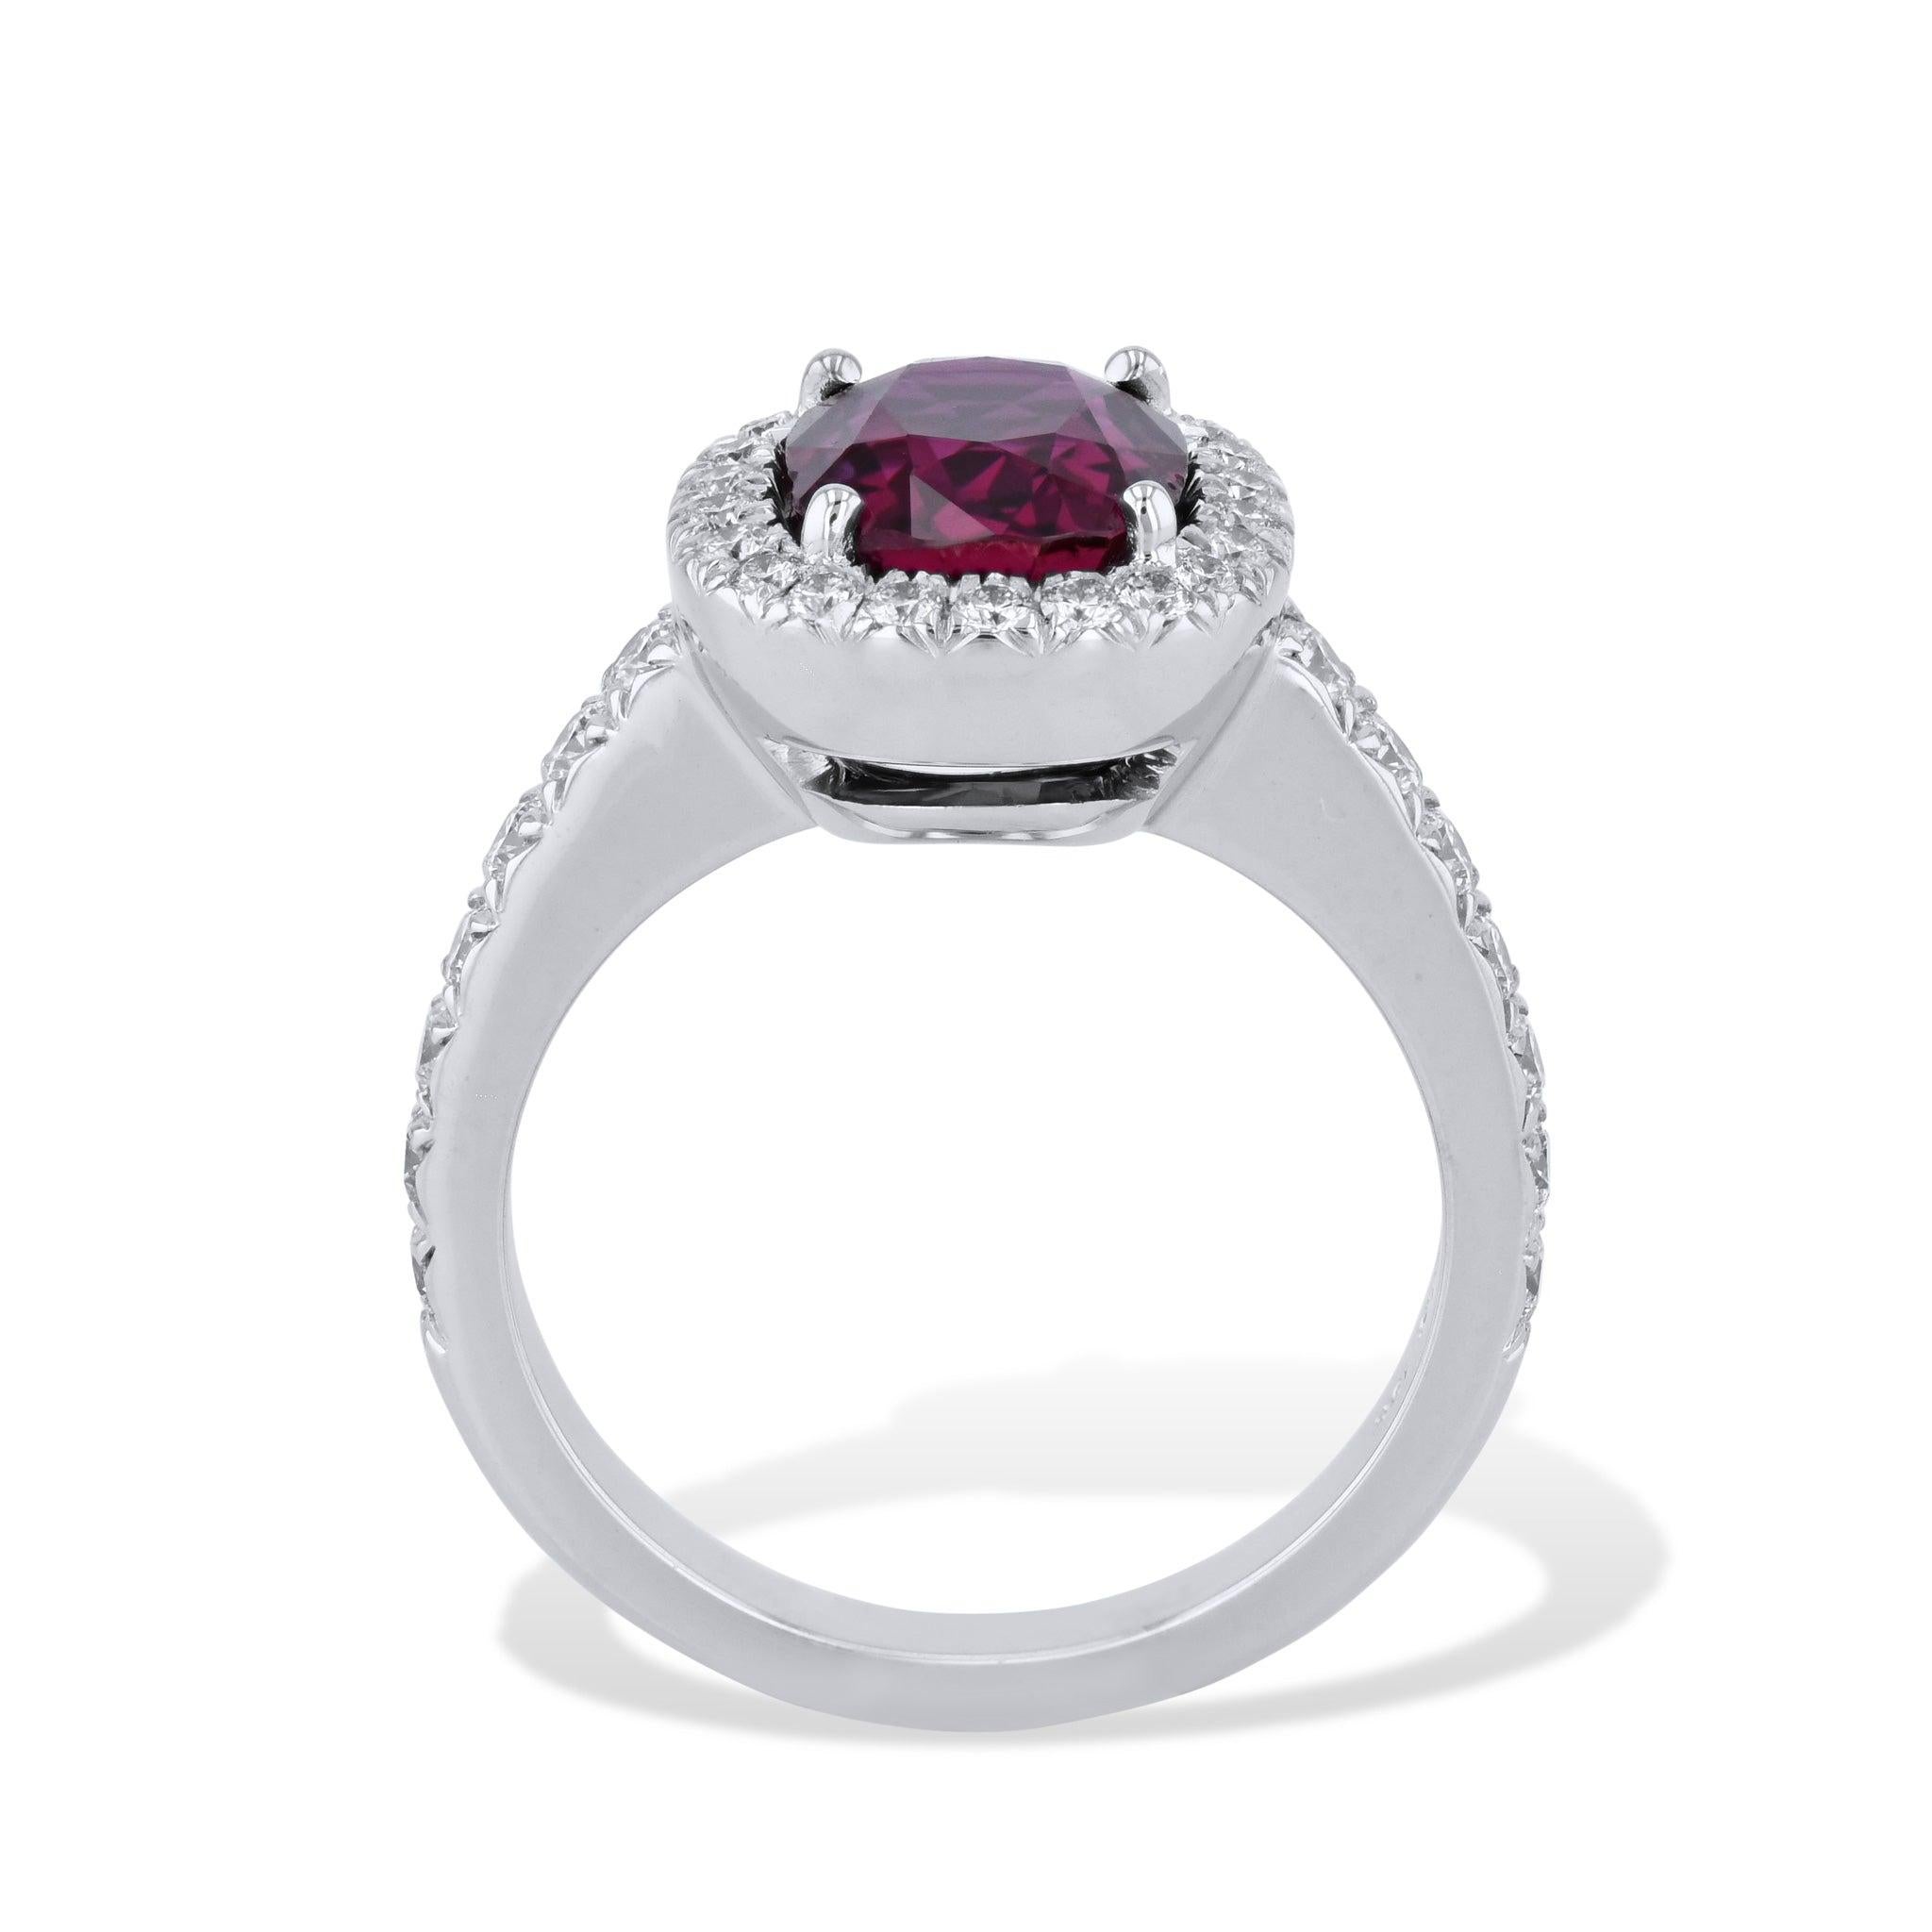 This luxurious Oval Ruby Pave Diamond White Gold Ring is handcrafted from 18 karat white gold. It  features a breathtaking 3.07 carat oval ruby at its center. There is an additional 36 pieces of 0.63 total carats of diamond pave that surrounds the